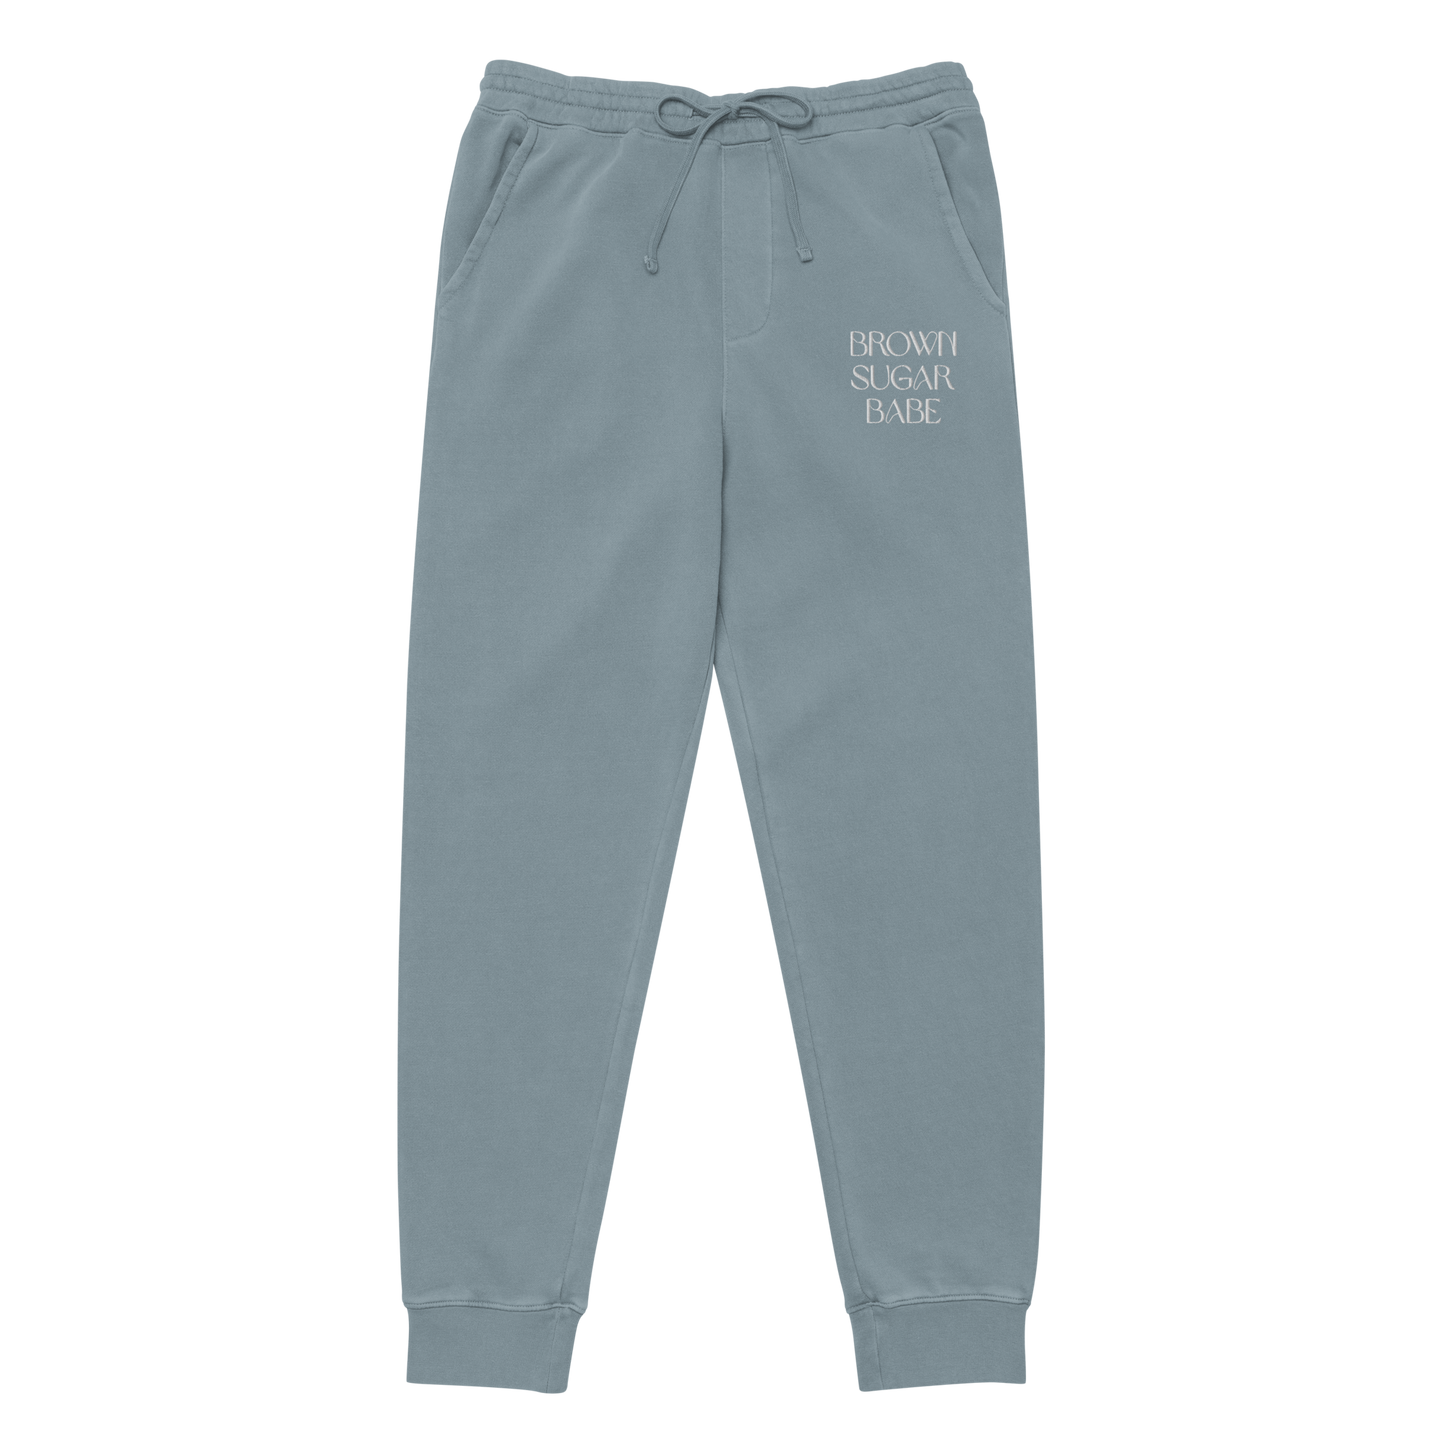 Brown Sugar Babe Pigment-Dyed Sweatpants